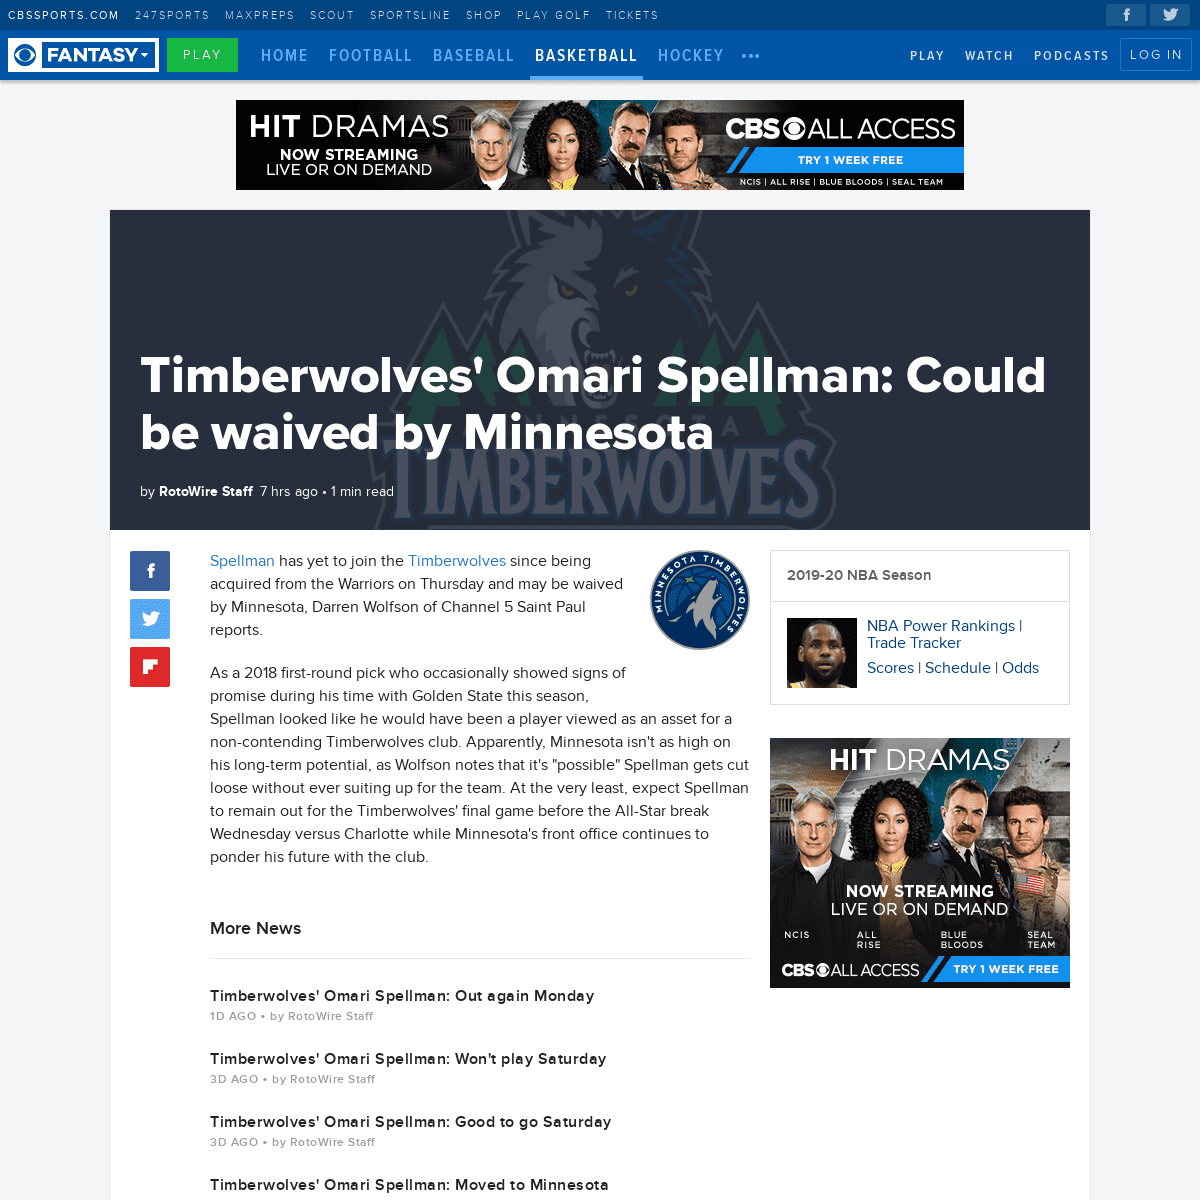 A complete backup of www.cbssports.com/fantasy/basketball/news/timberwolves-omari-spellman-could-be-waived-by-minnesota/